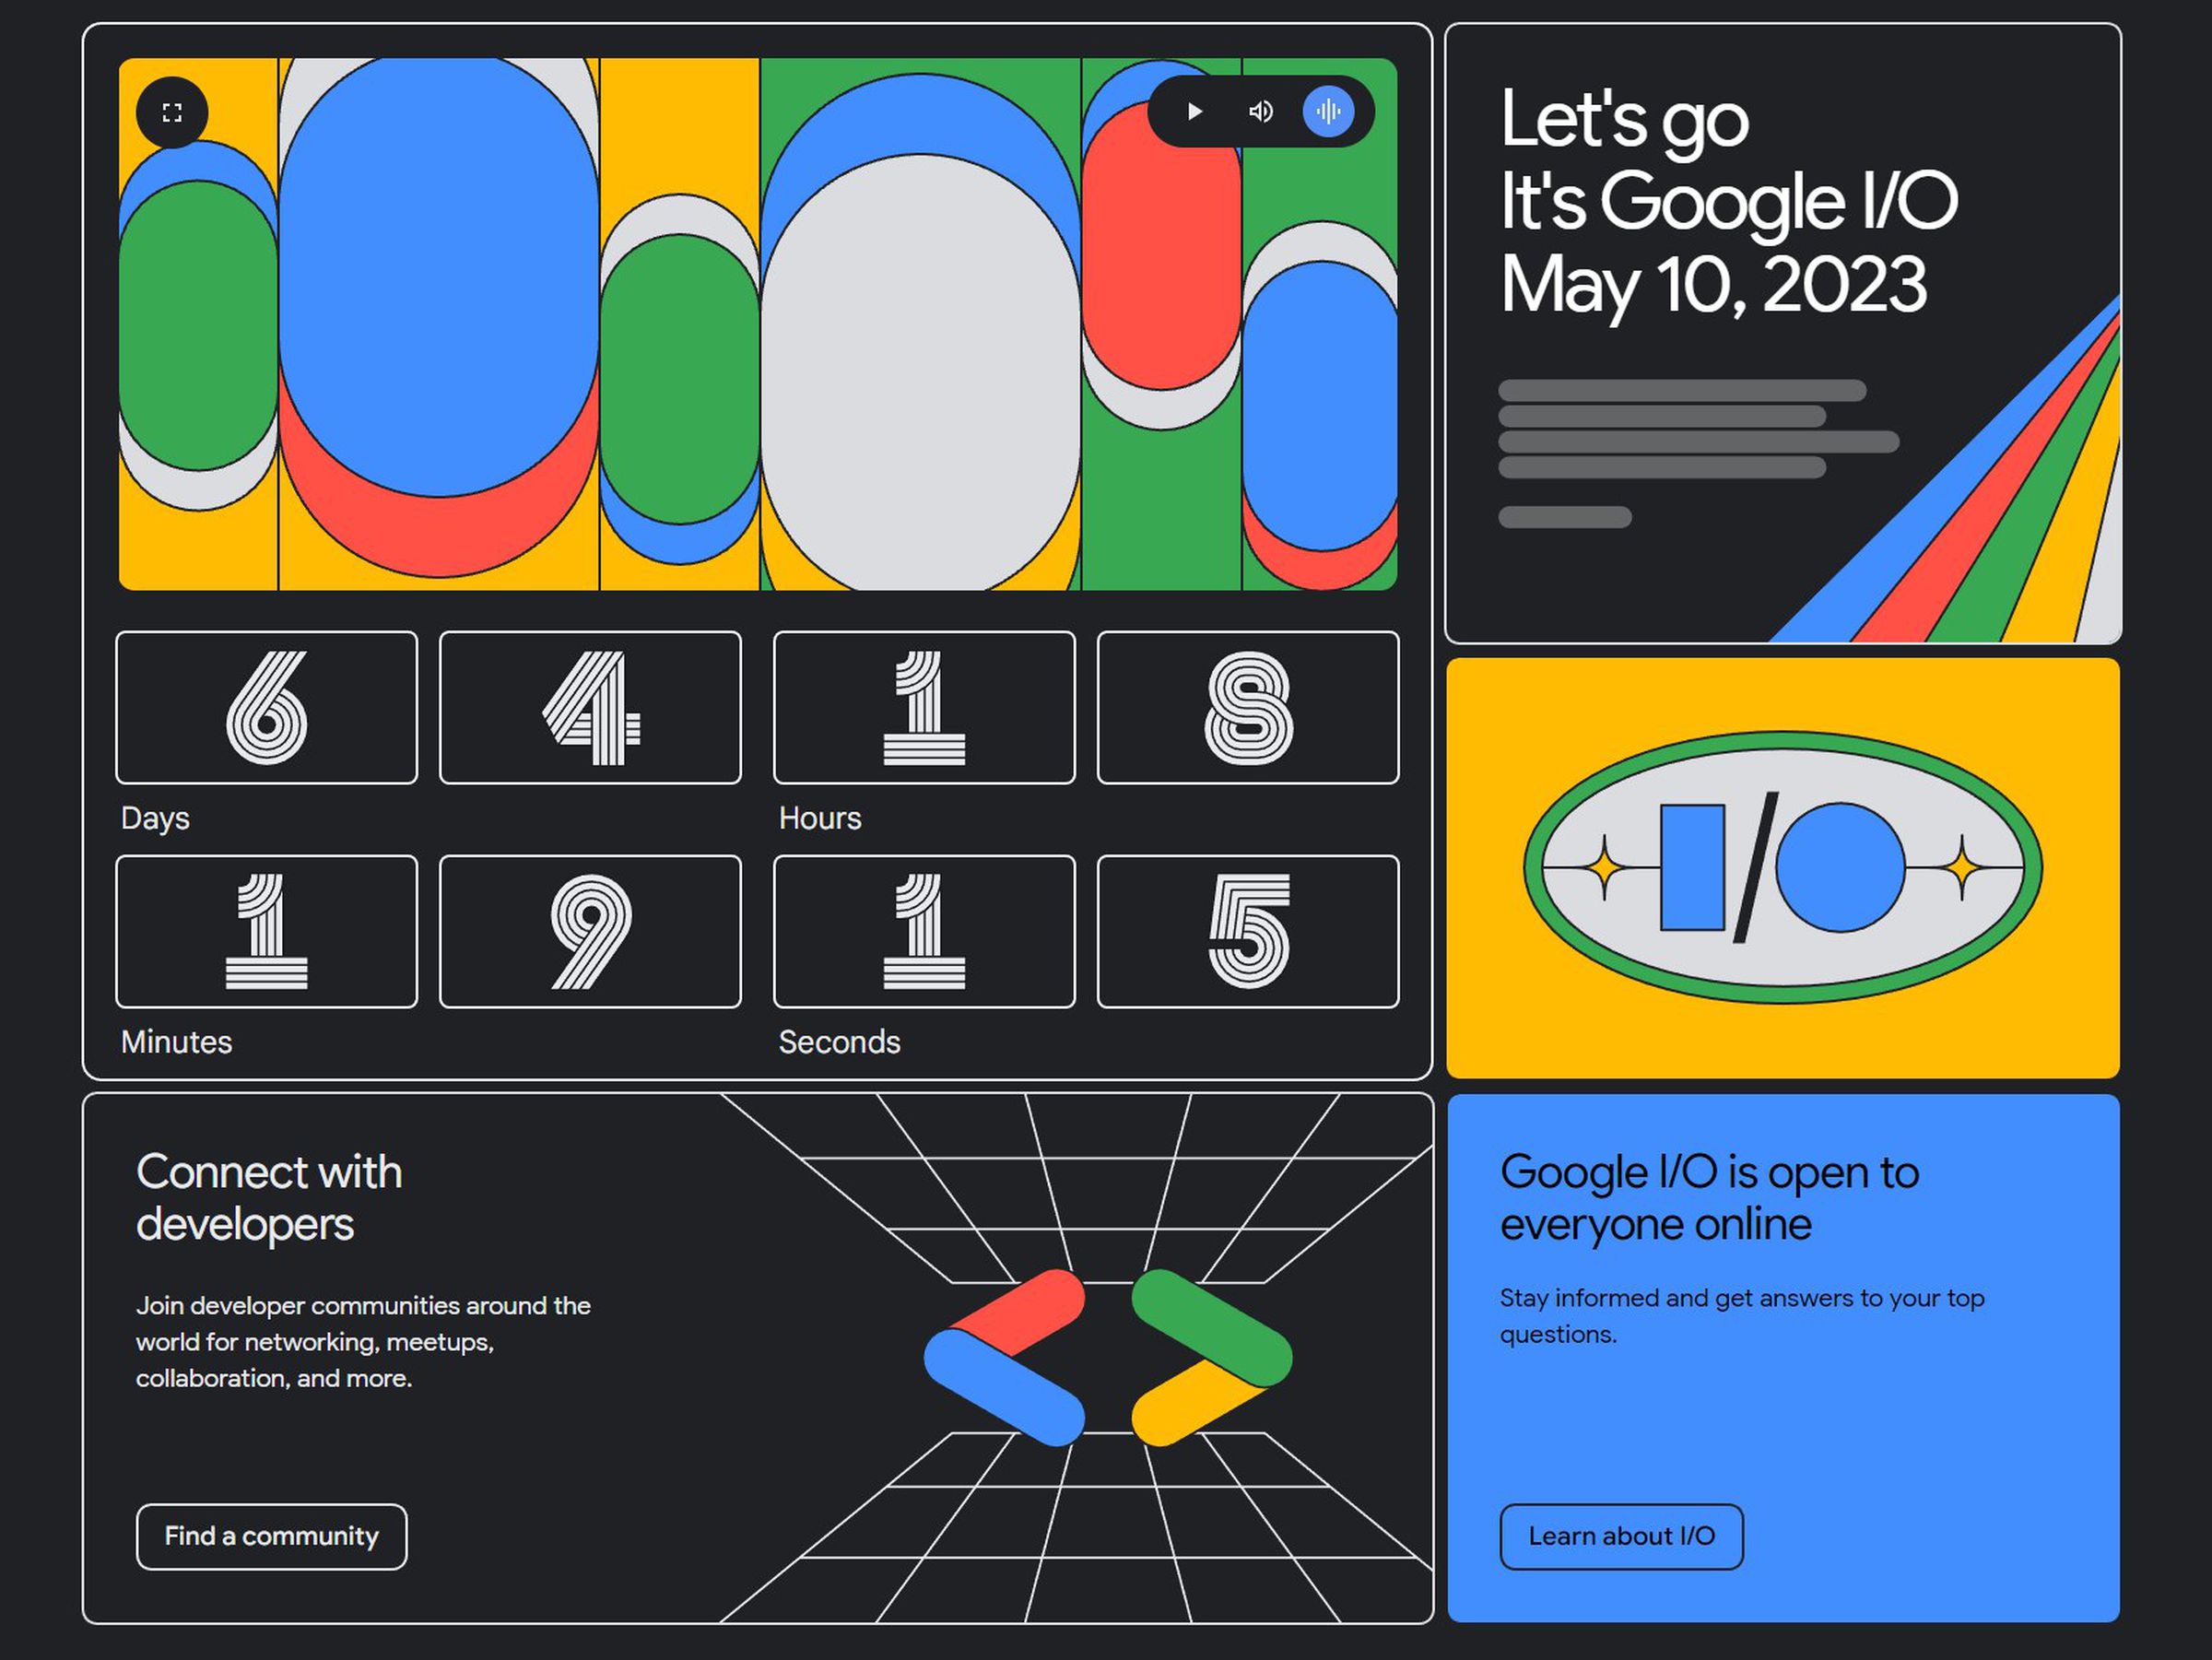 The Google I/O event website shows a countdown timer and other information, arranged in tiles and with spaces for notifications that are similar to the screen of a mobile device like a tablet or foldable smartpohone. Google I/O 2023